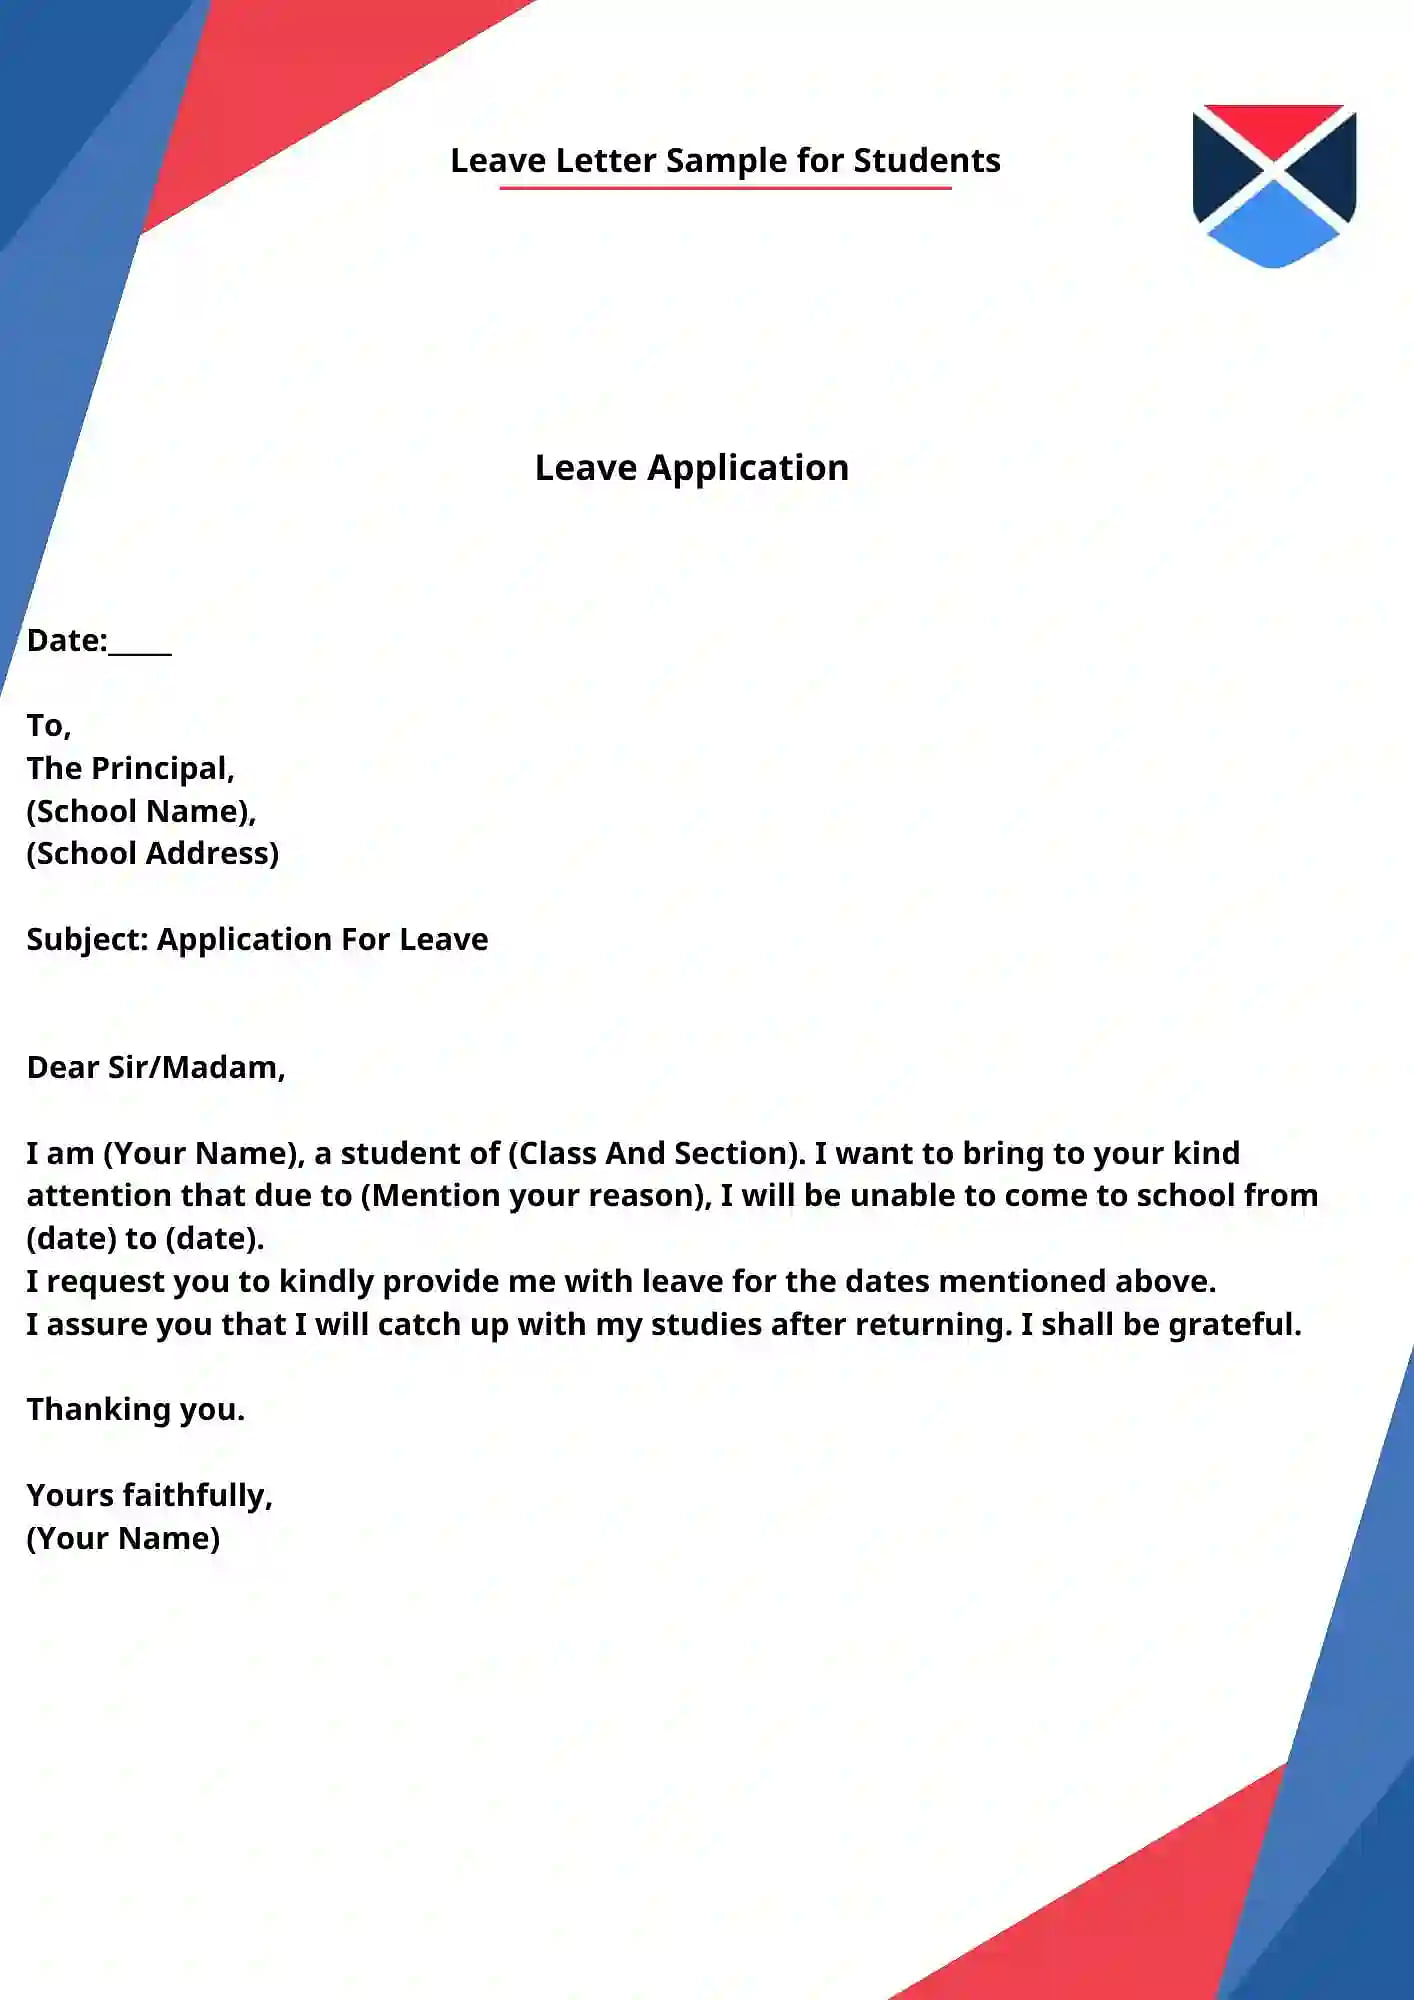 leave application letter to school principal by student